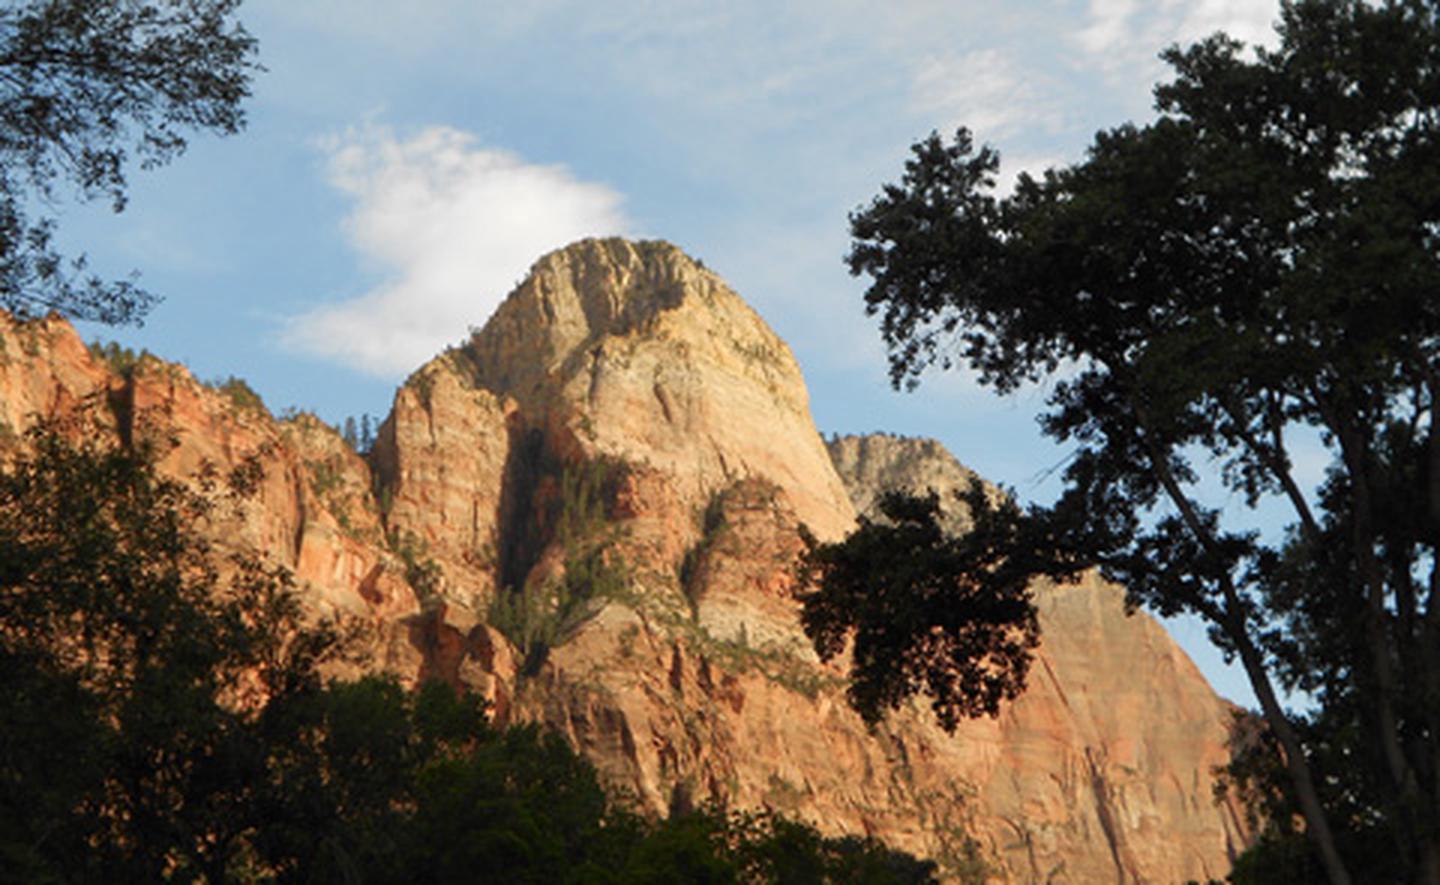 Mountain of the SunThe Mountain of the Sun in Zion Canyon.